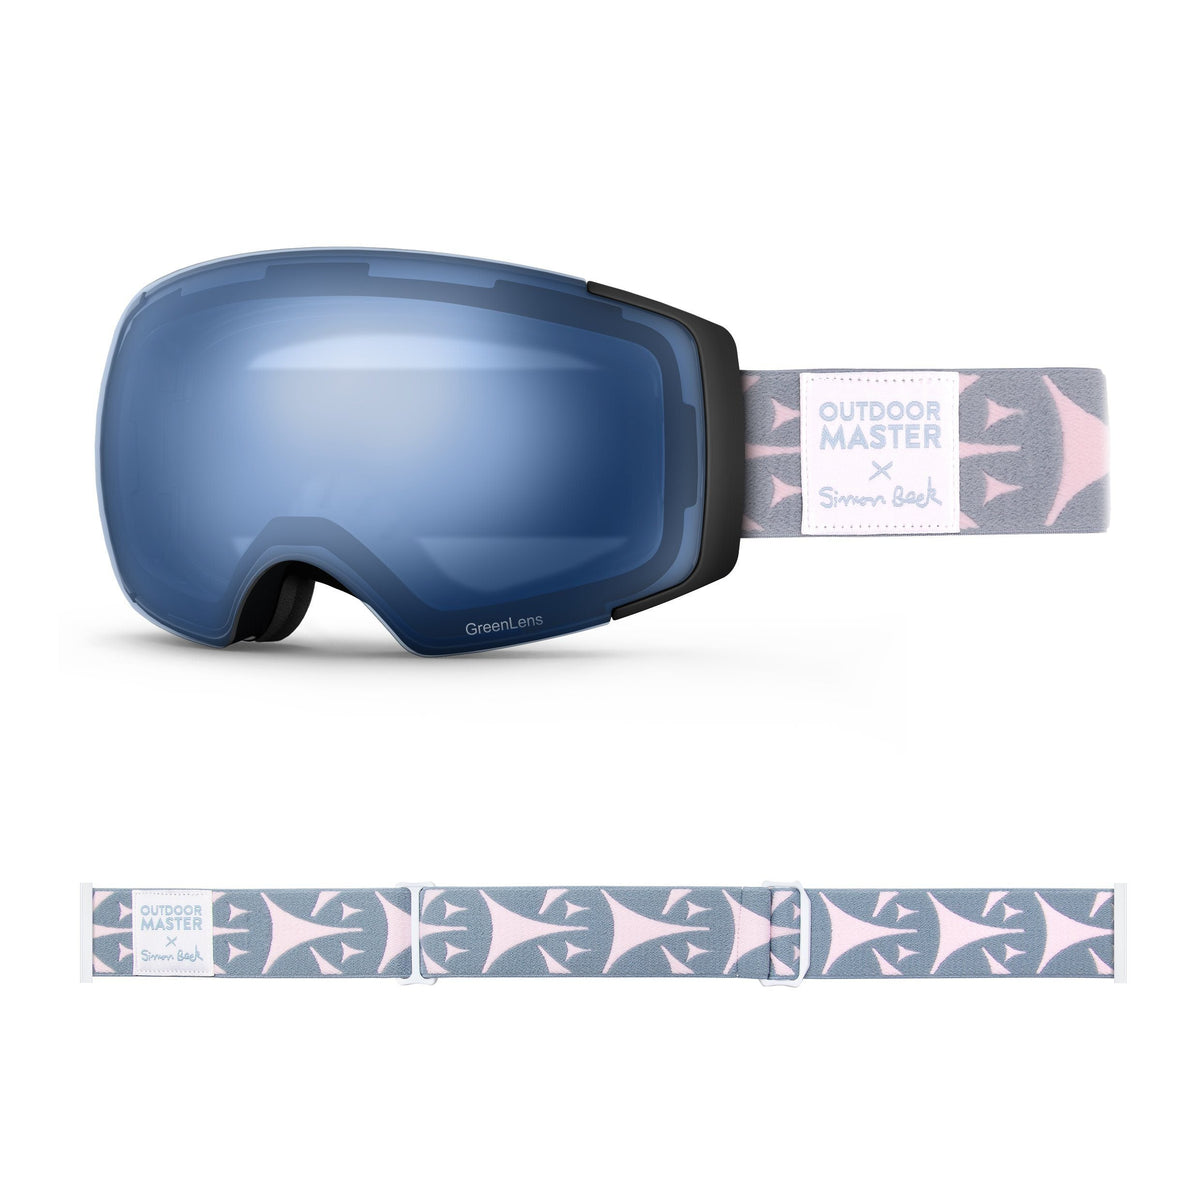 OutdoorMaster x Simon Beck Ski Goggles Pro Series - Snowshoeing Art Limited Edition OutdoorMaster GreenLens VLT 60% TAC Blue Polarized Bouncy Triangles